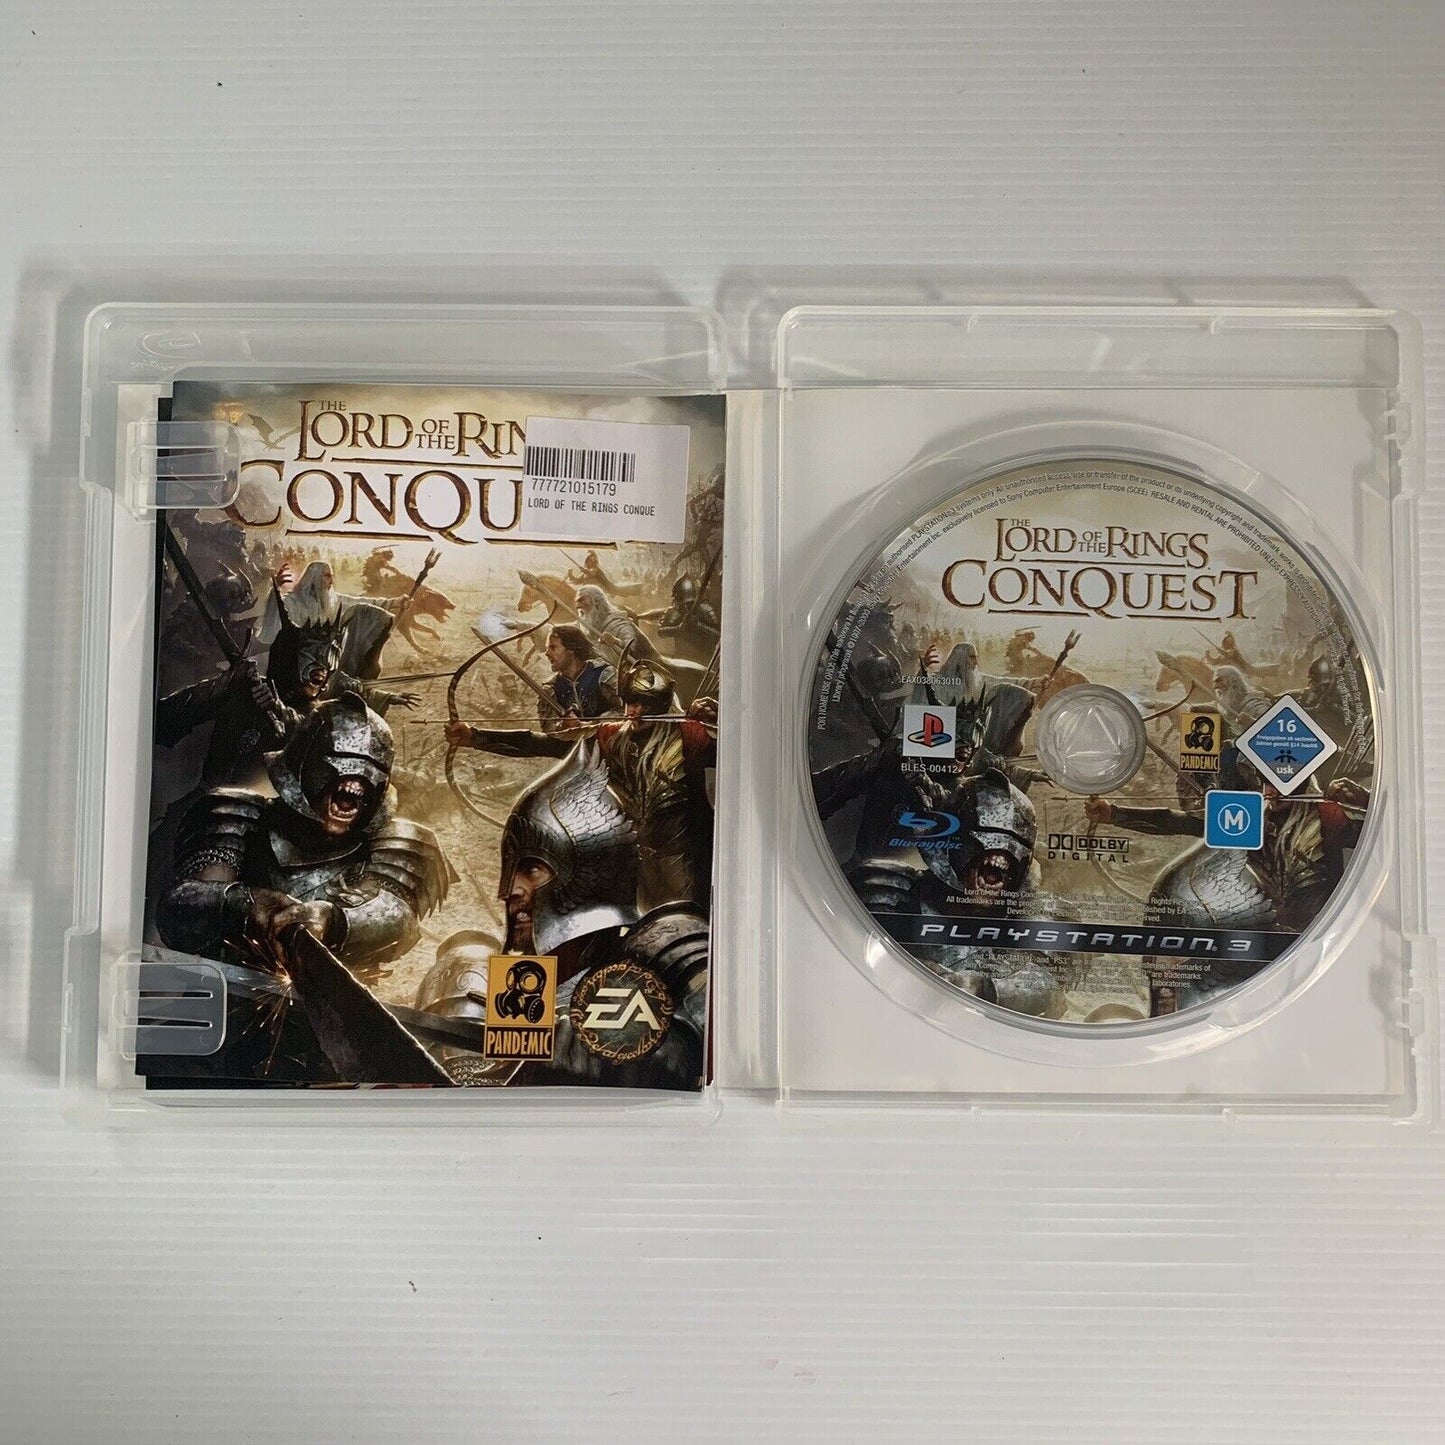 The Lord of the Rings Conquest Playstation 3 PS3 Game